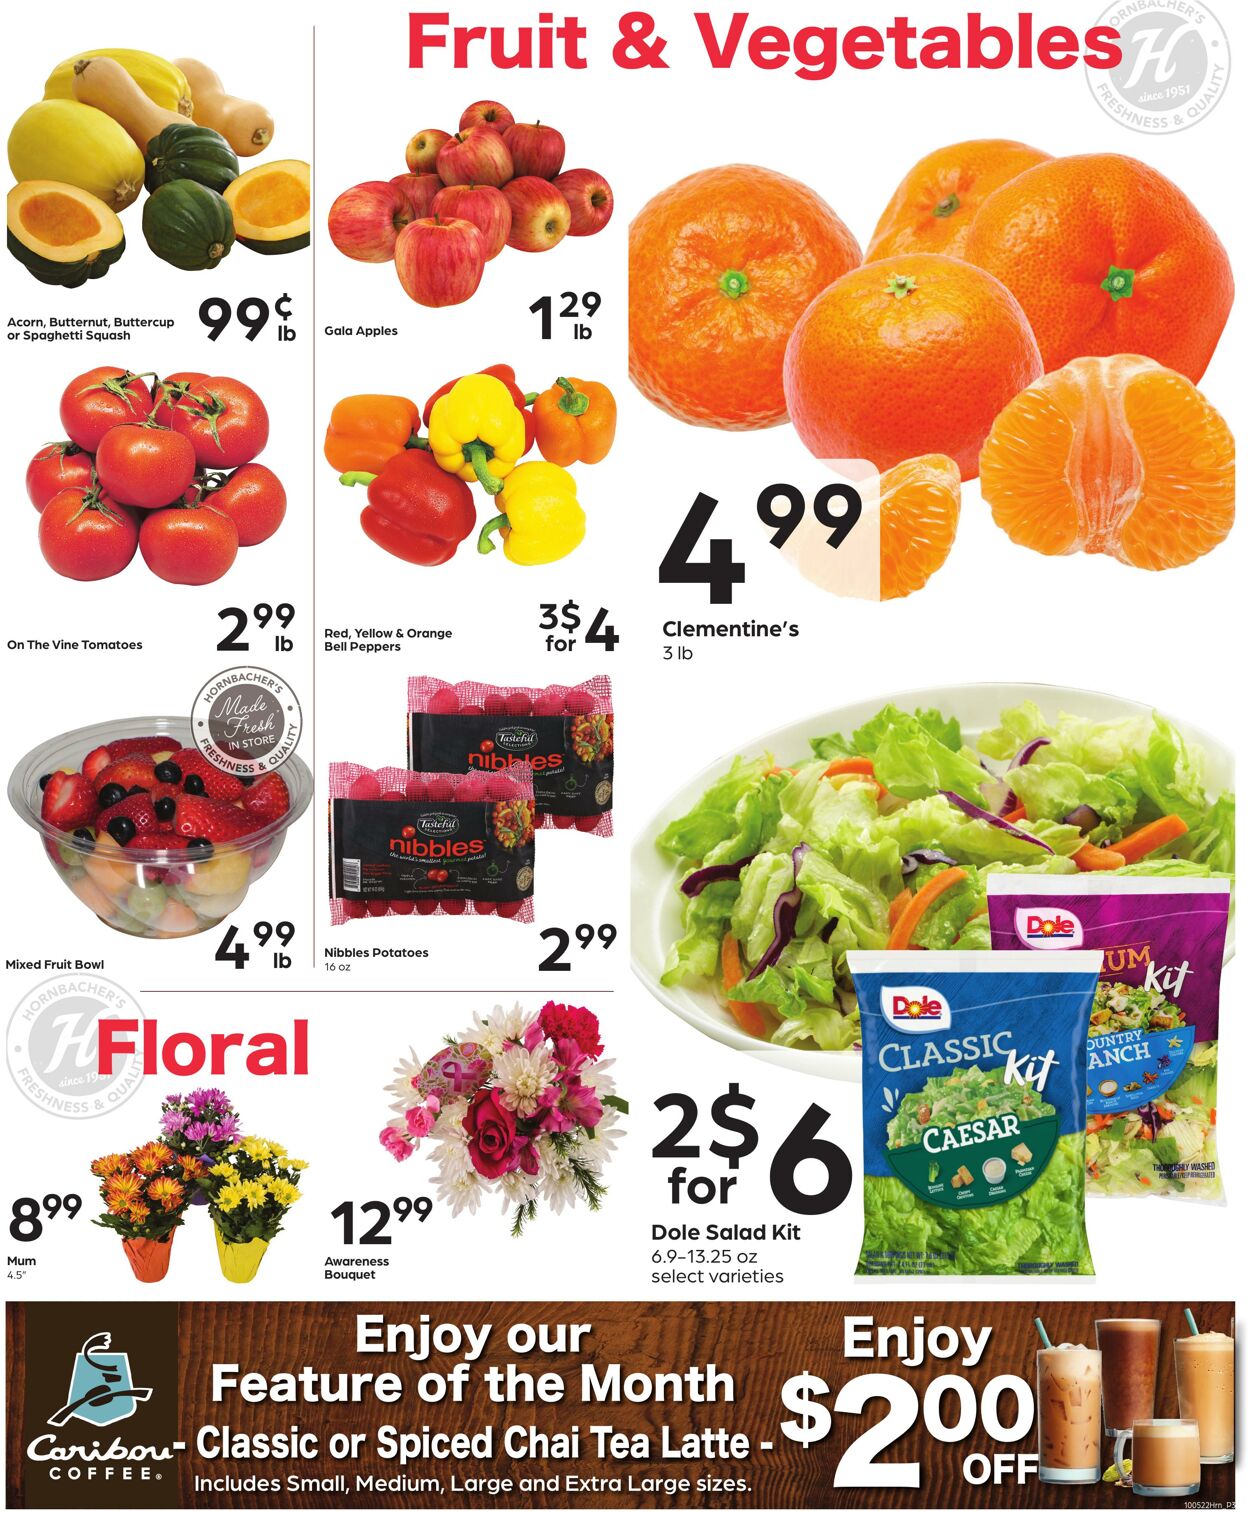 Weekly ad Hornbacher's 10/05/2022 - 10/11/2022